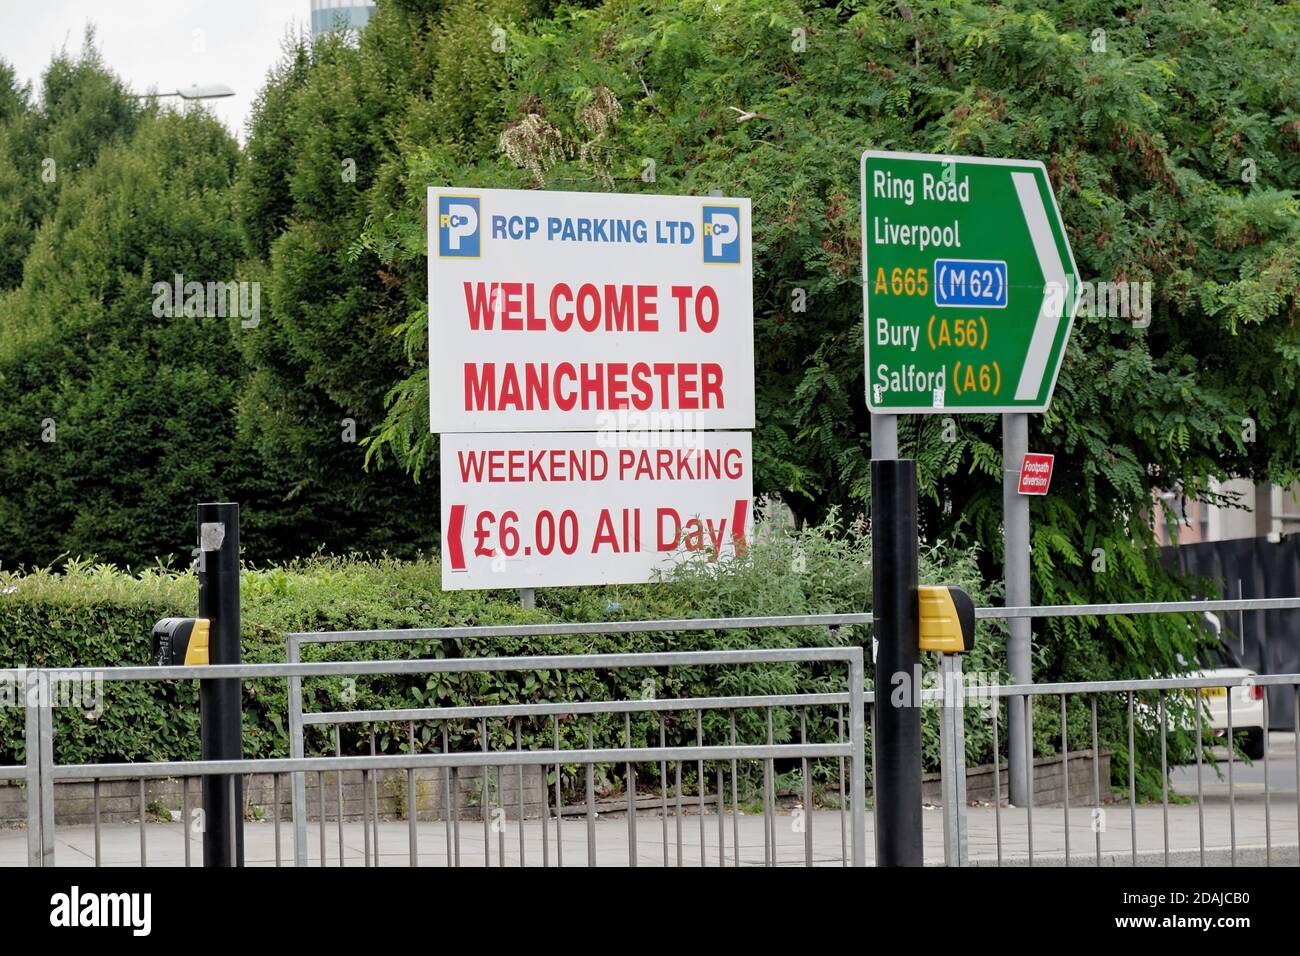 RCP Parking Ltd 'WELCOME TO MANCHESTER' sign. Located on the intersection of Rochdale Road and the A665 Ring Road. Stock Photo